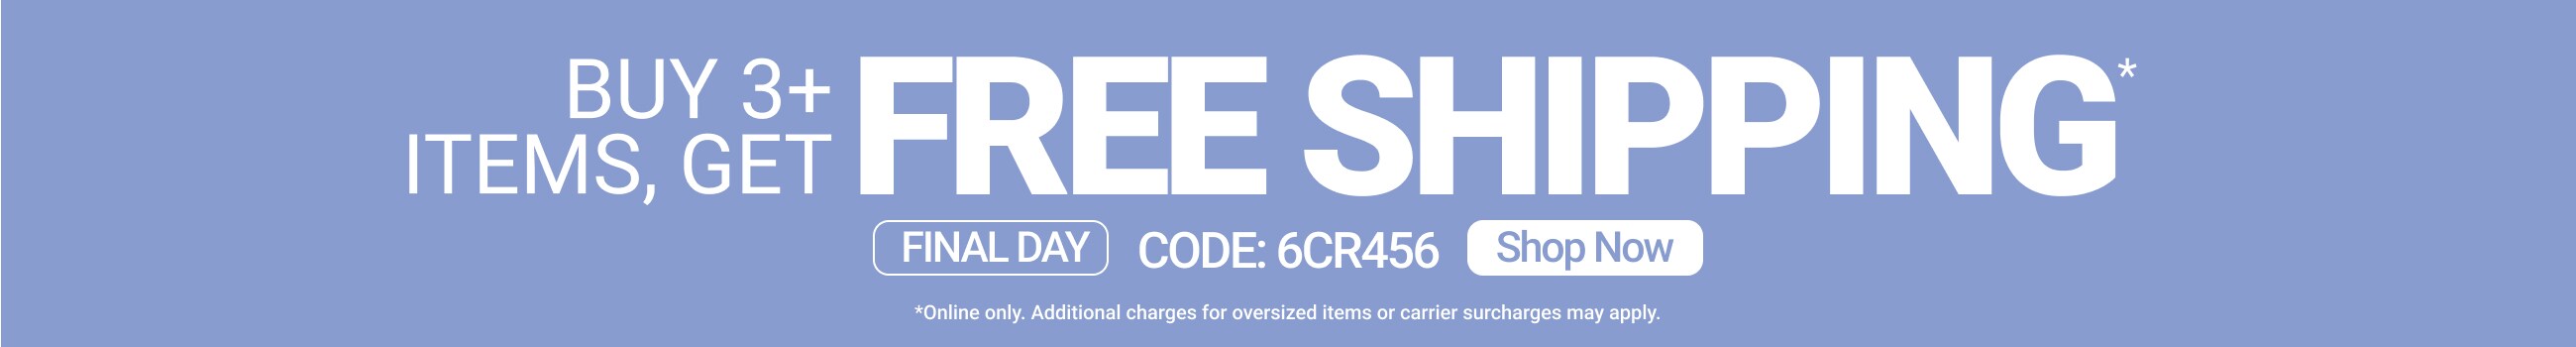 Buy 3+ Items, Get FREE SHIPPING - Shop Now